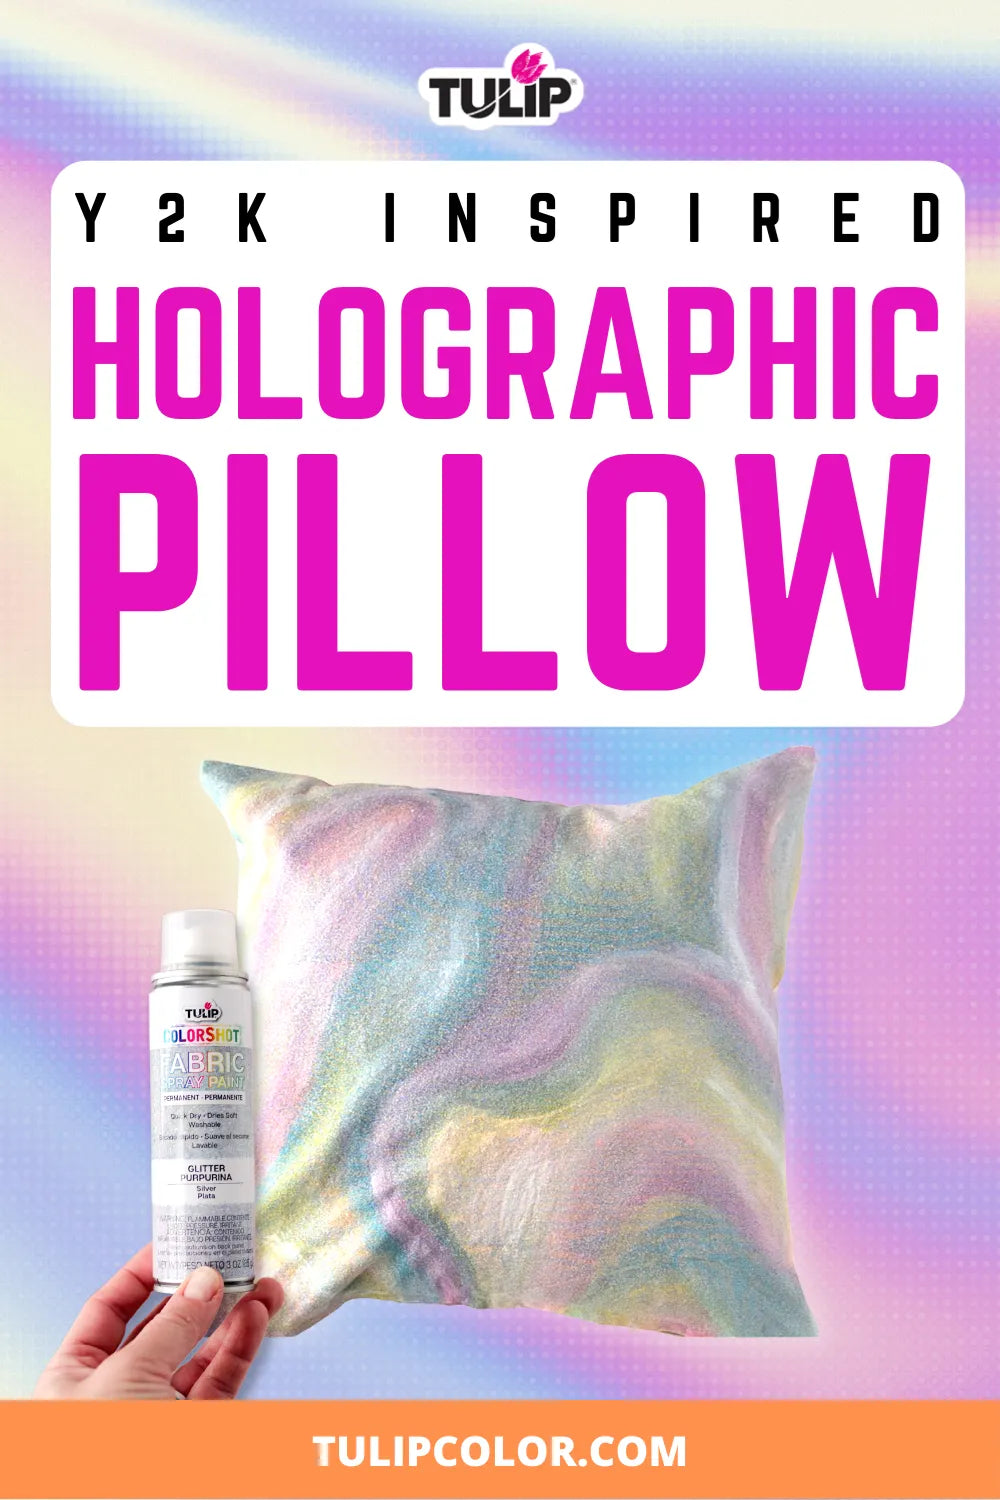 Y2K Holographic Pillow